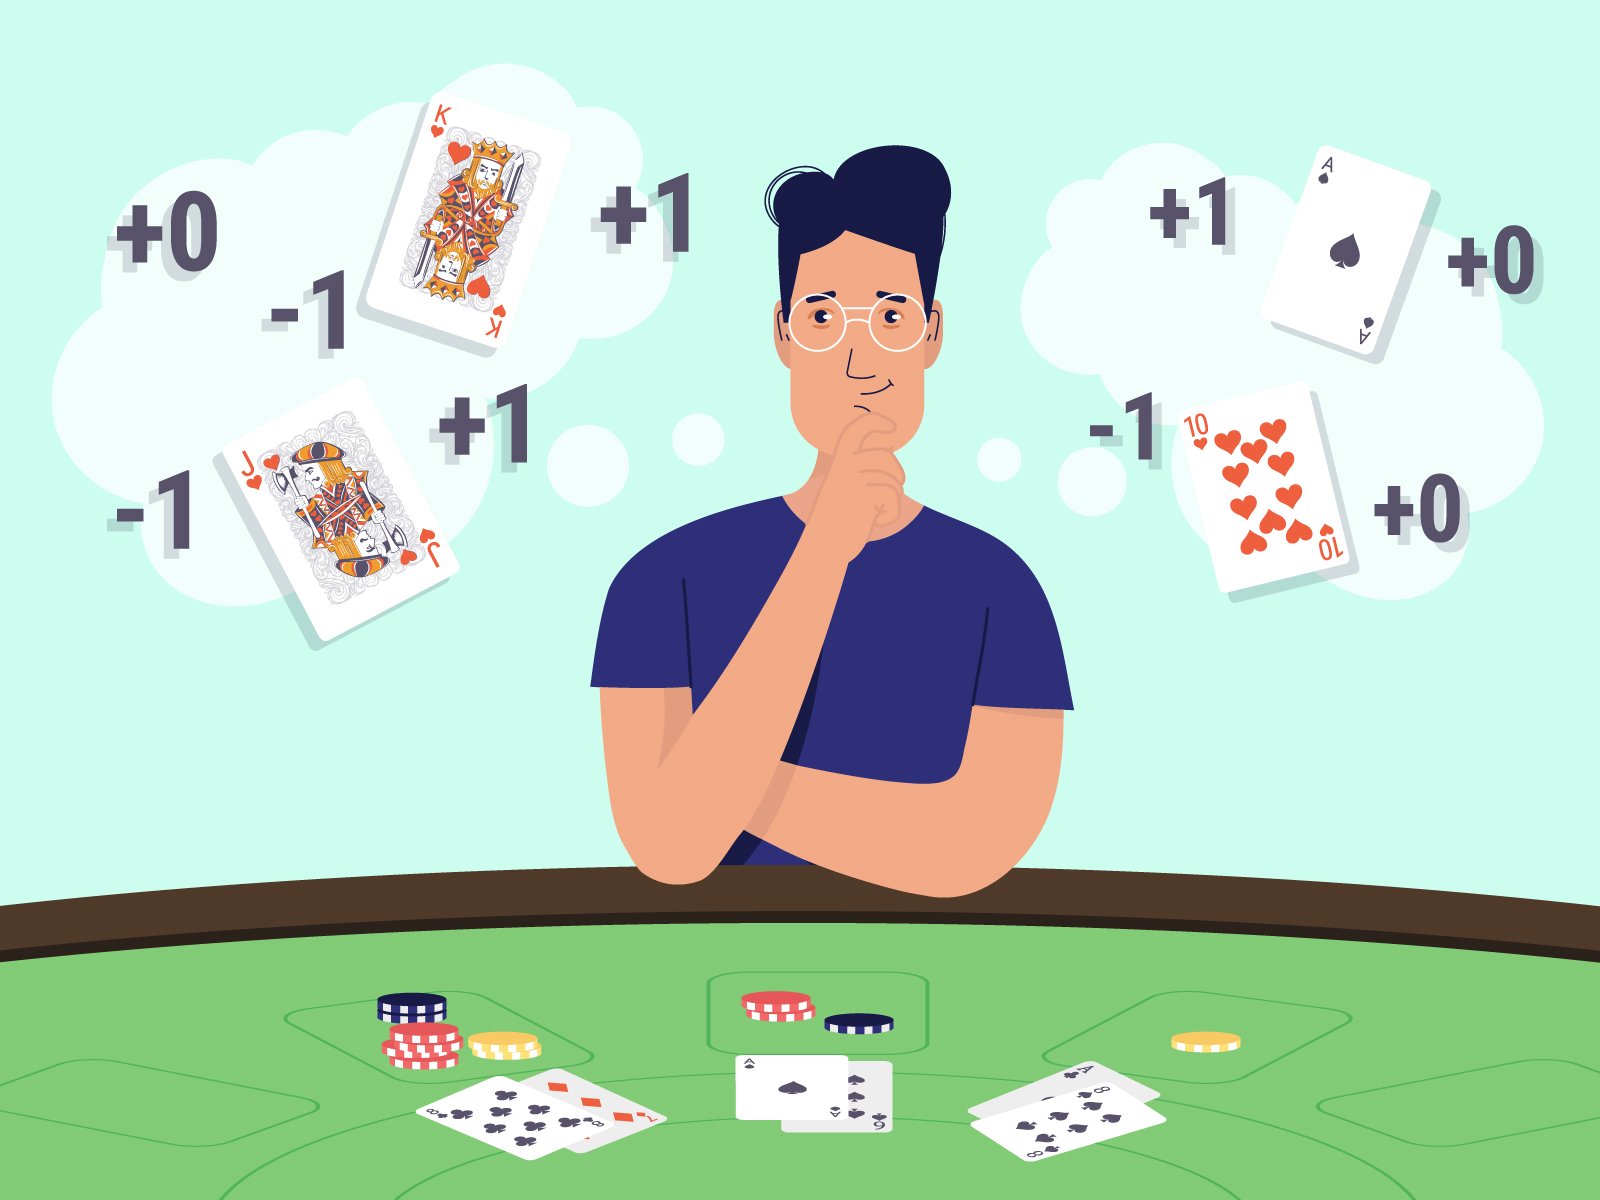 Is card counting illegal in Blackjack?